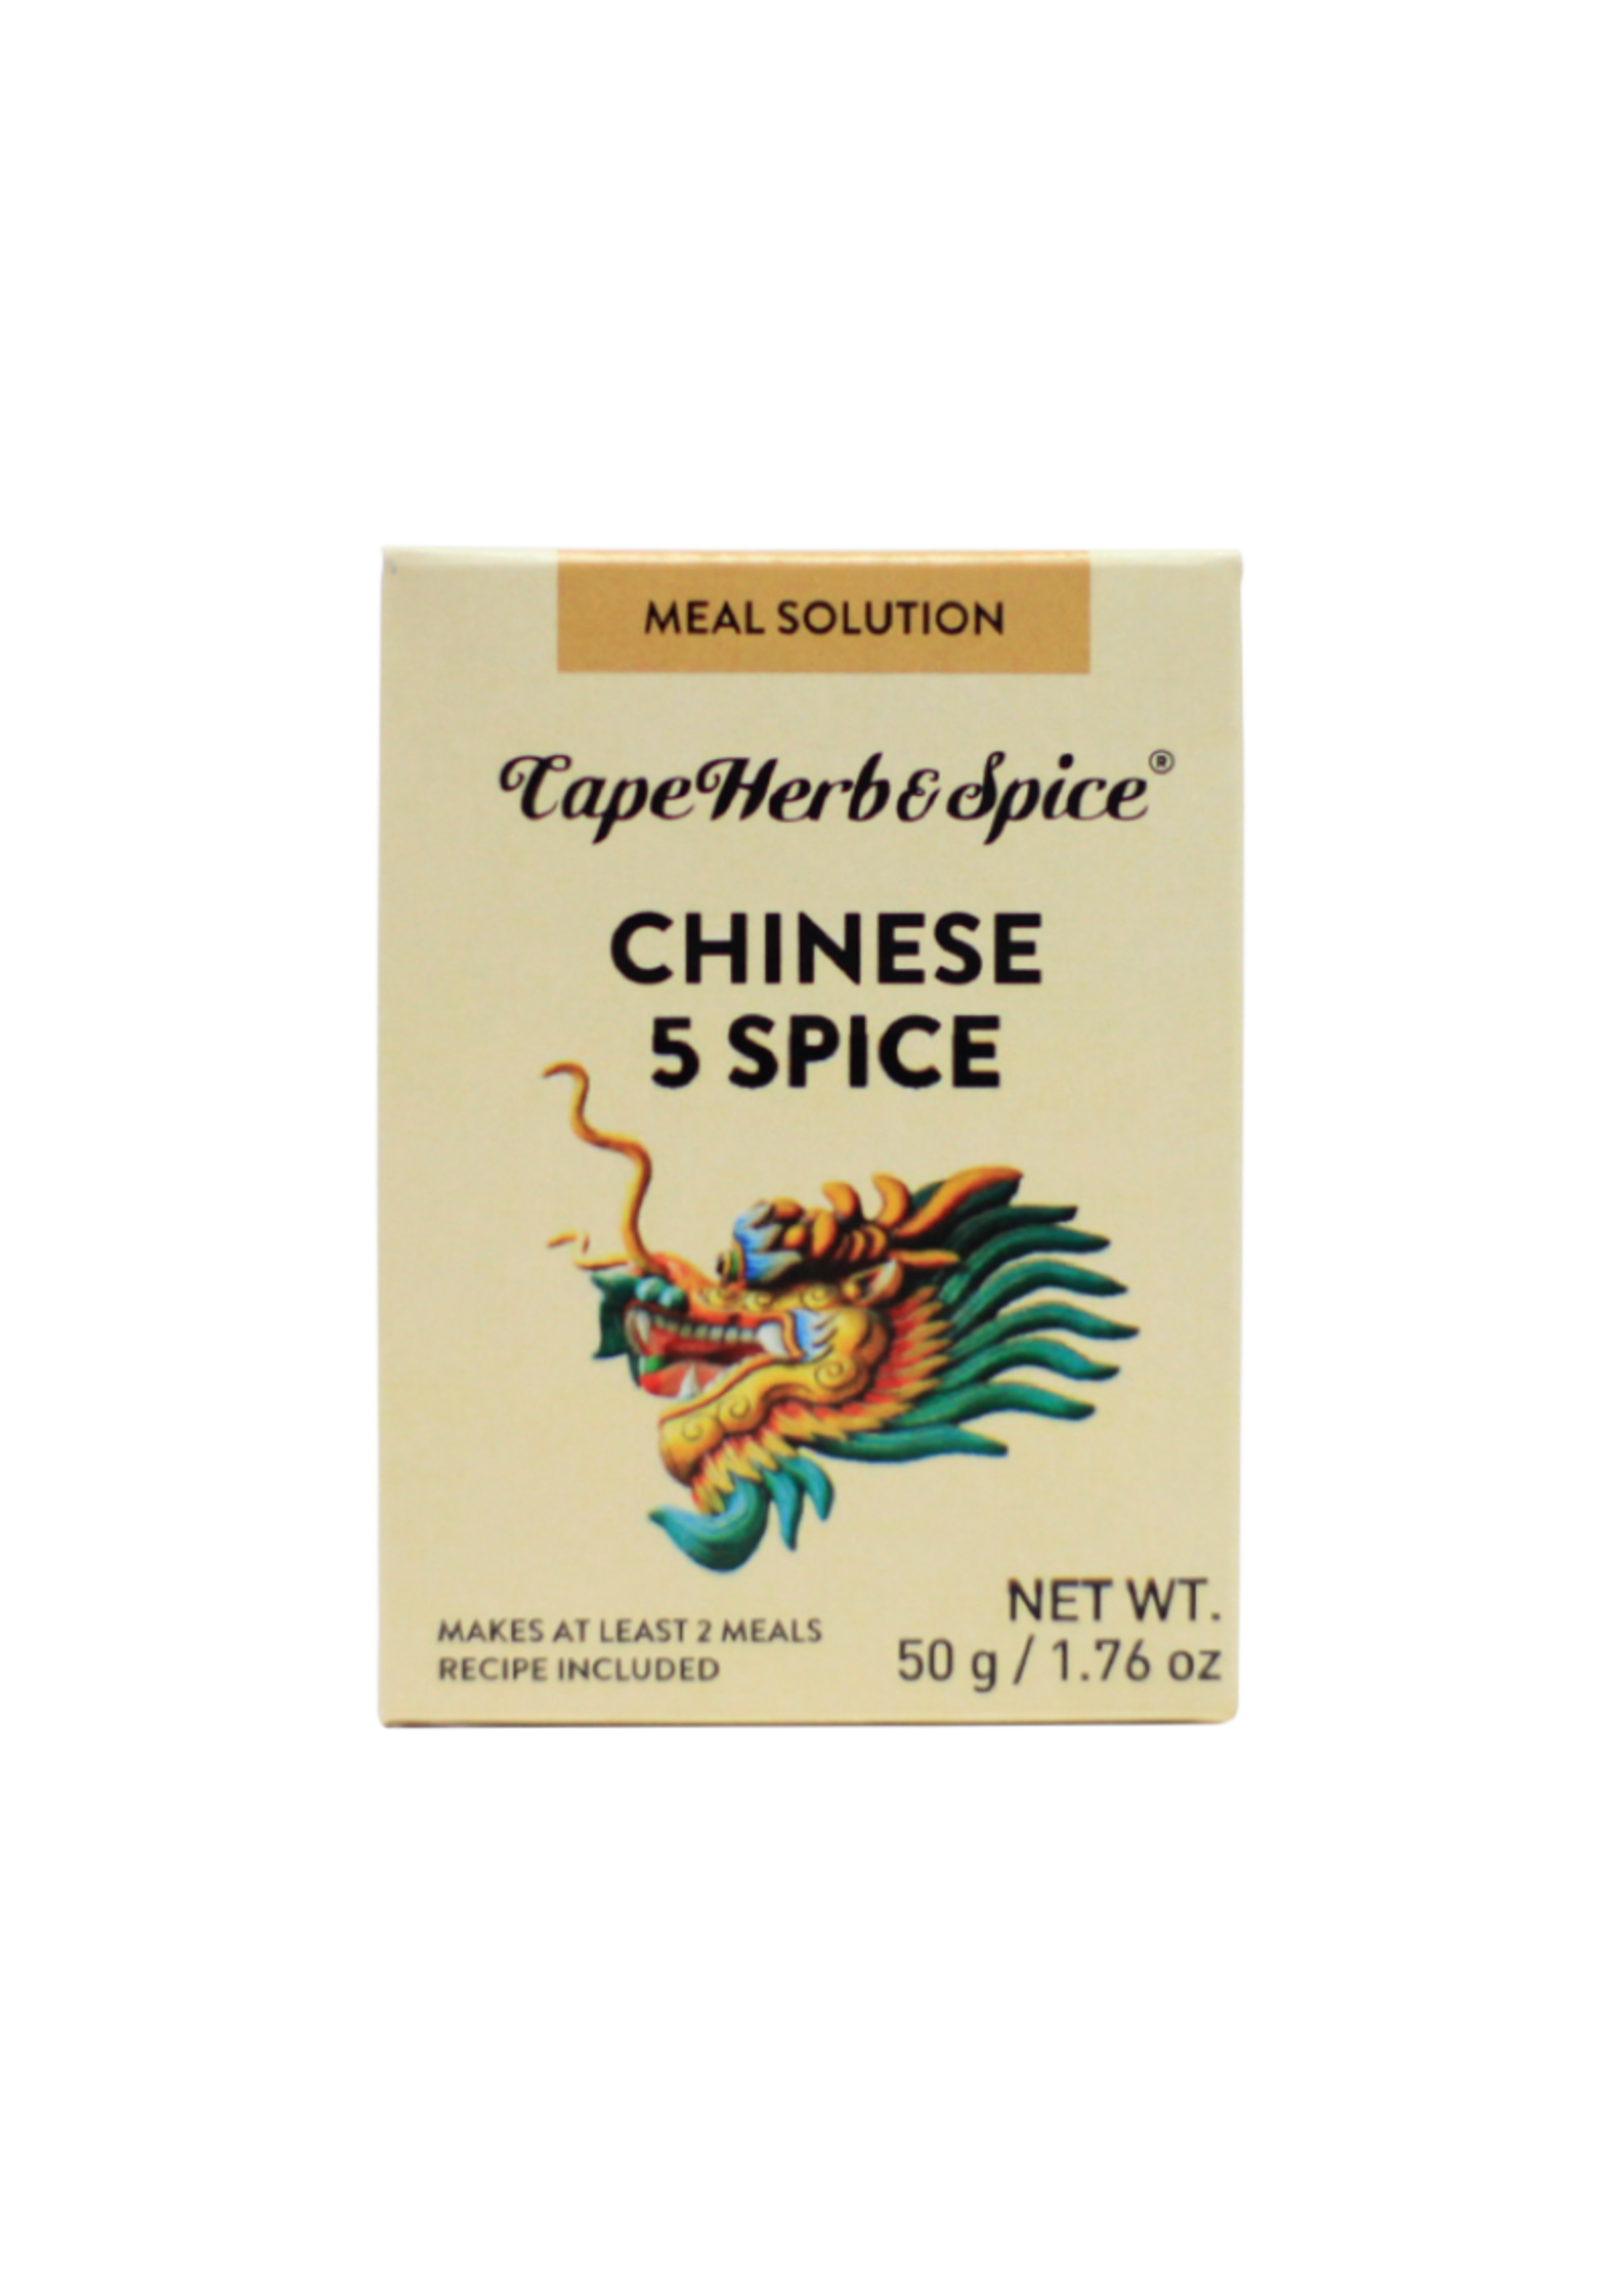 Cape Herb & Spice CHS EXOTIC SPICE MEAL KITS - Chinese 5 Spice